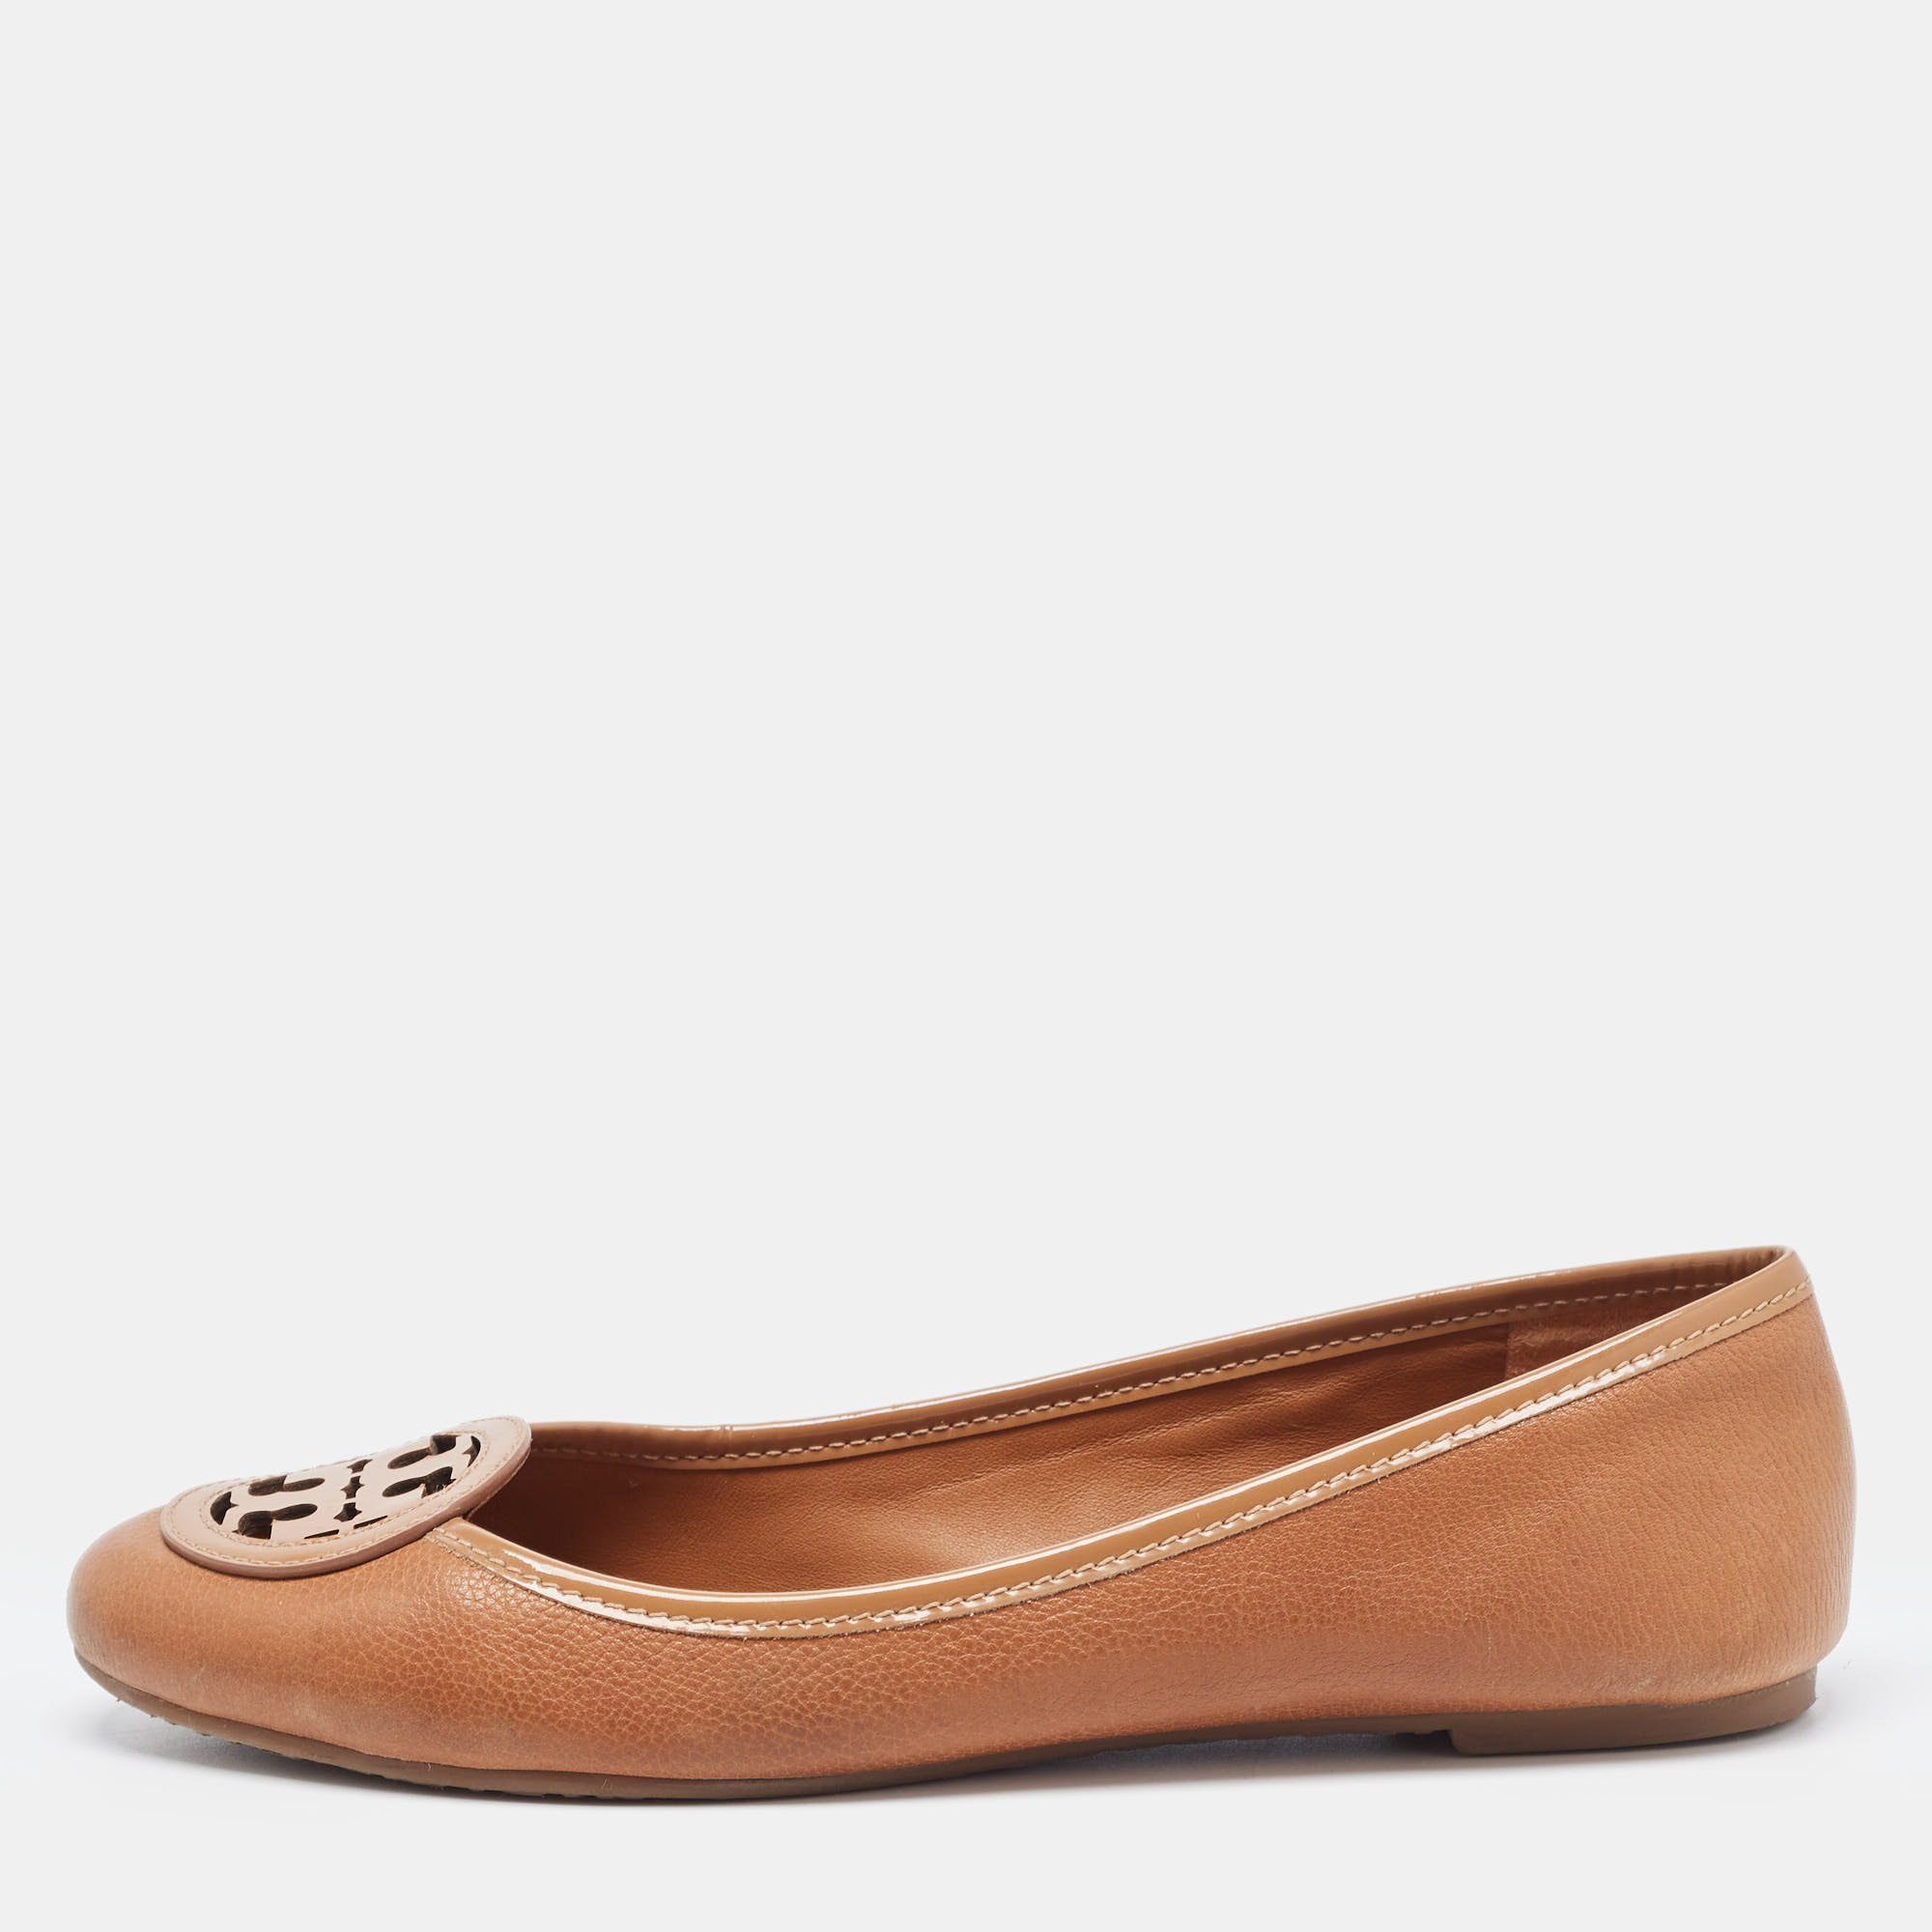 Tory Burch Brown Leather Lowell Ballet Flats Size 38